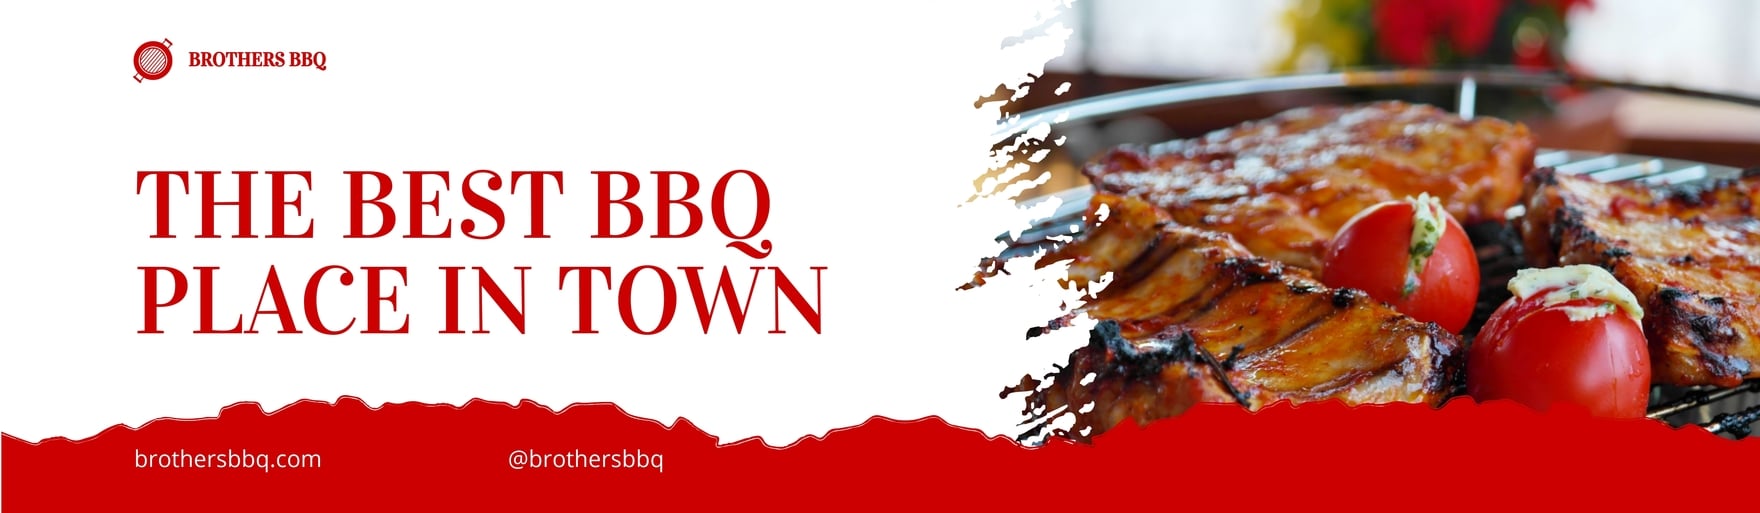 BBQ Shop Billboard Template in Word, Google Docs, PDF, Apple Pages, Publisher